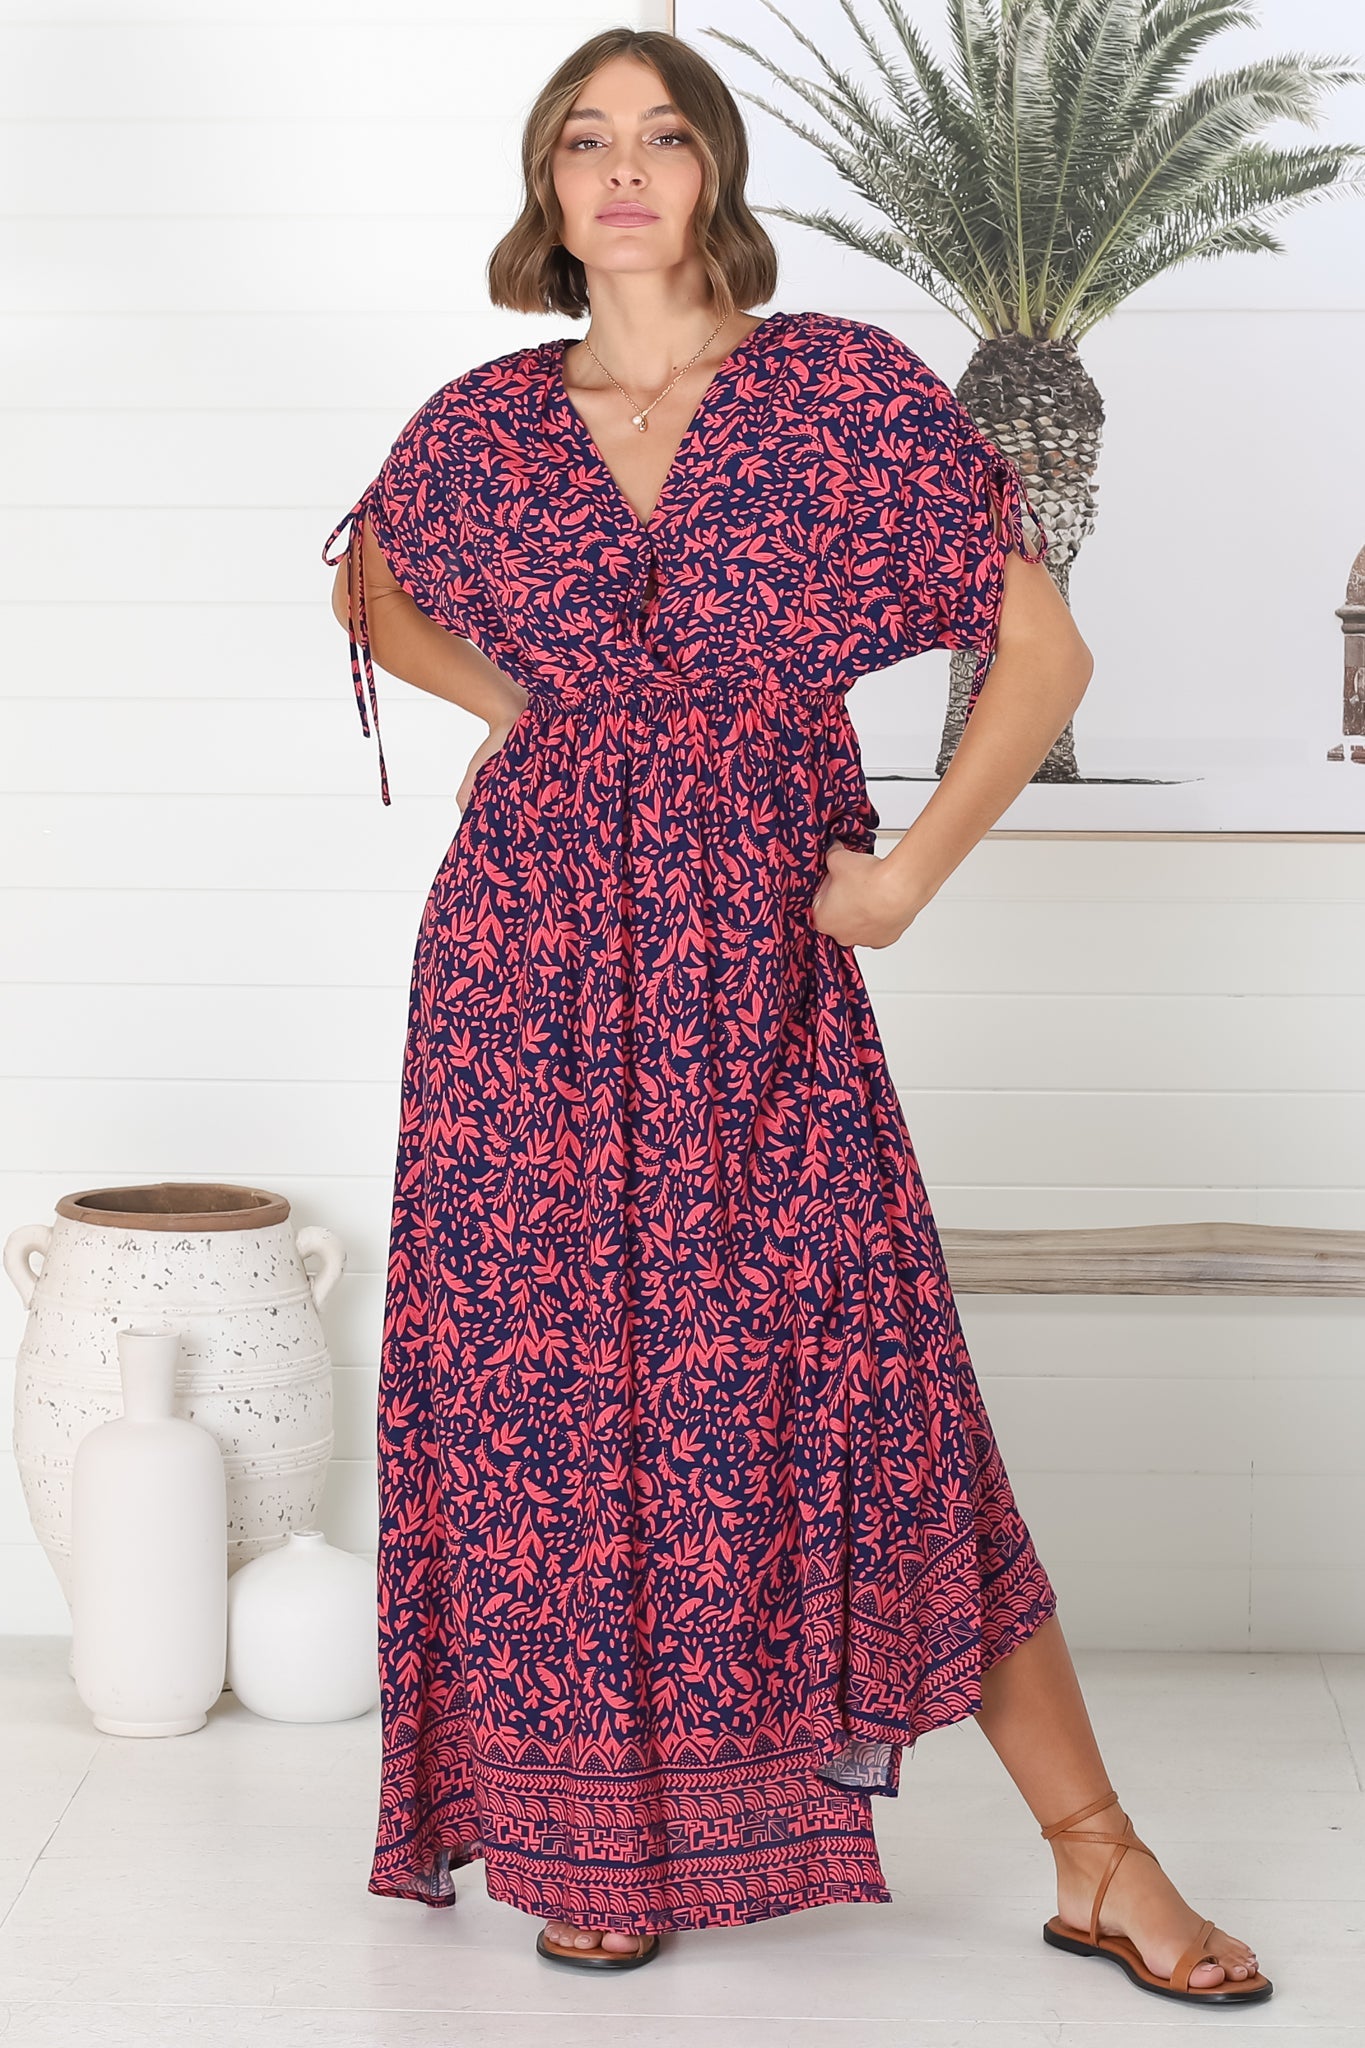 Lanta Maxi Dress - Cross Over Bodice Batwing Sleeves with Tie Detail Dress in Graphic Floral Print